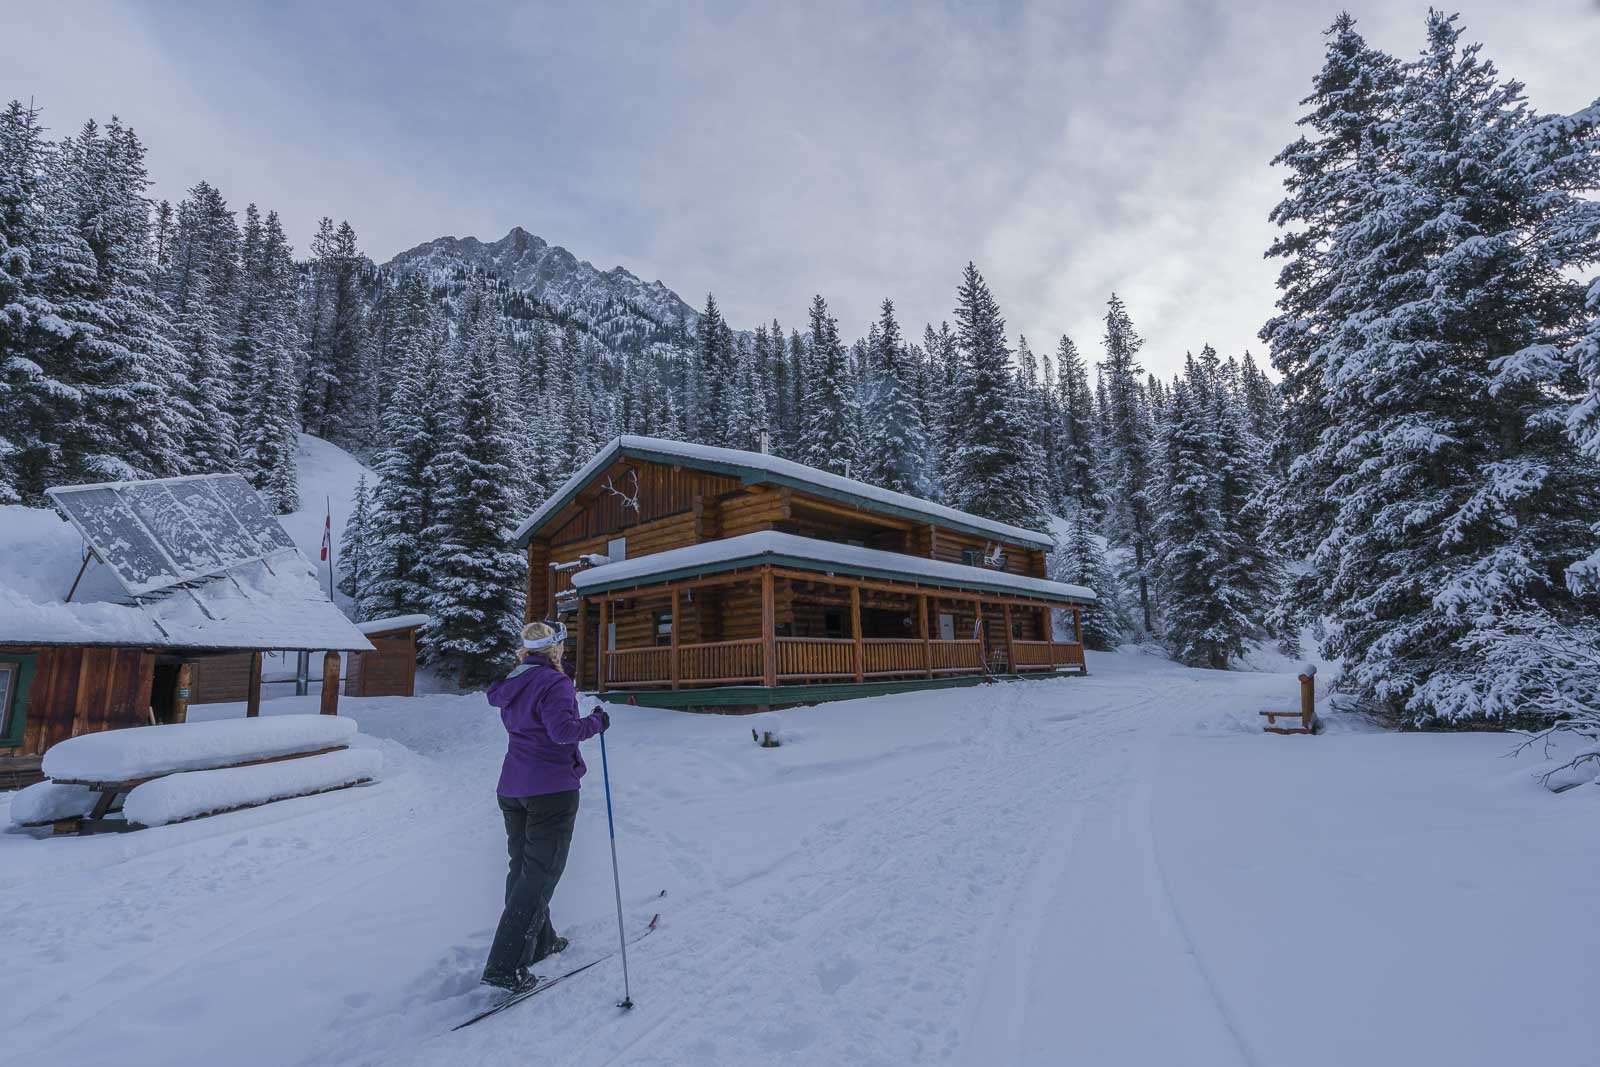 Stay in a backcountry lodge things to do in Banff Alberta